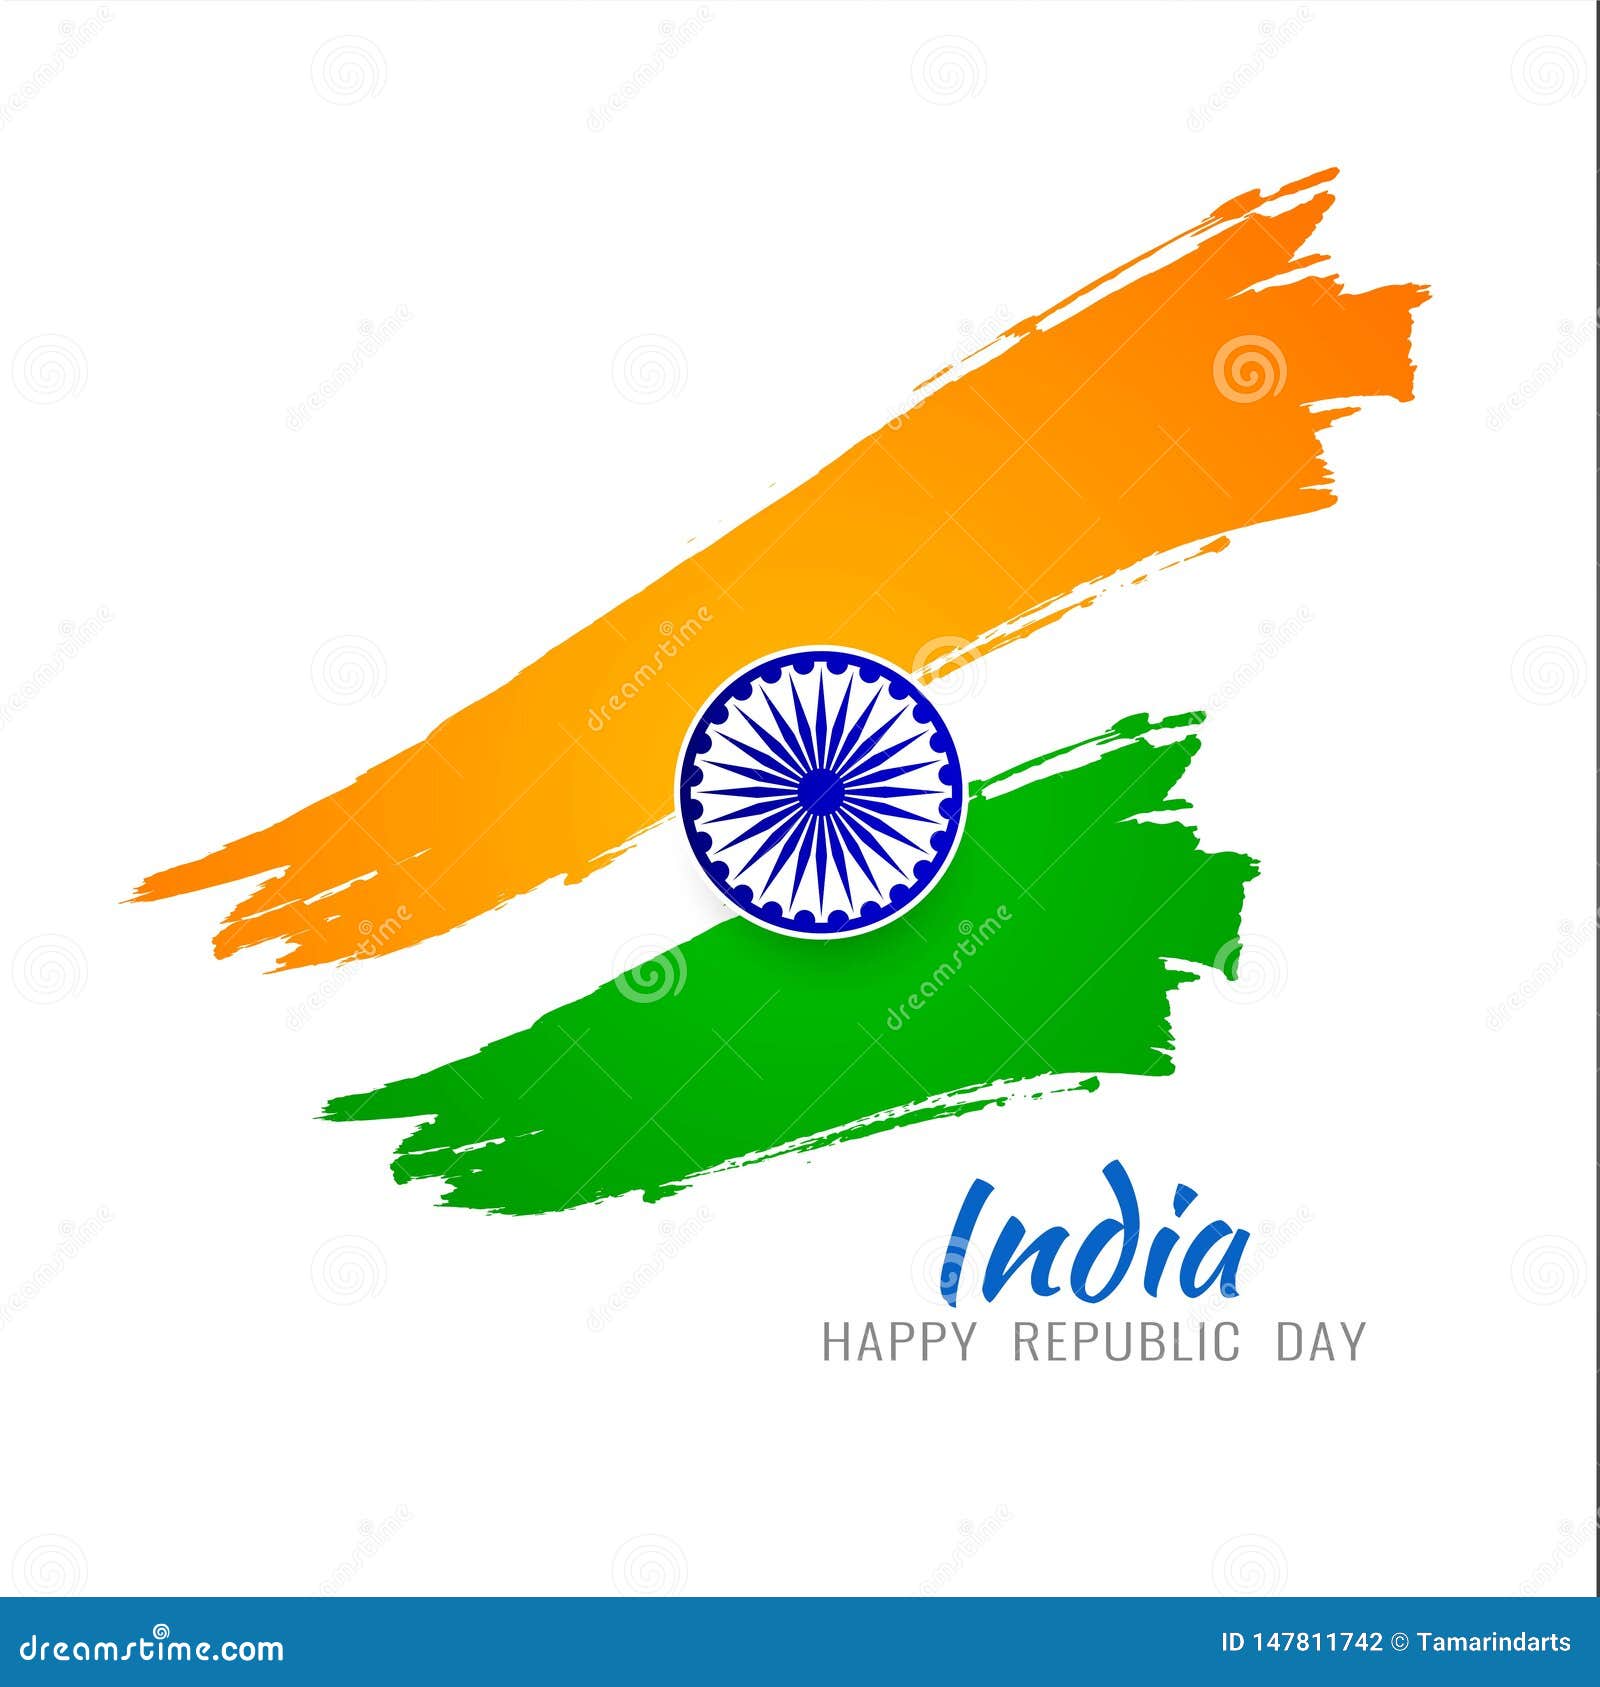 Painted Indian Flag Colors Abstract Freedom Celebration Background Banner  Stock Photo by dreamofart 250646440